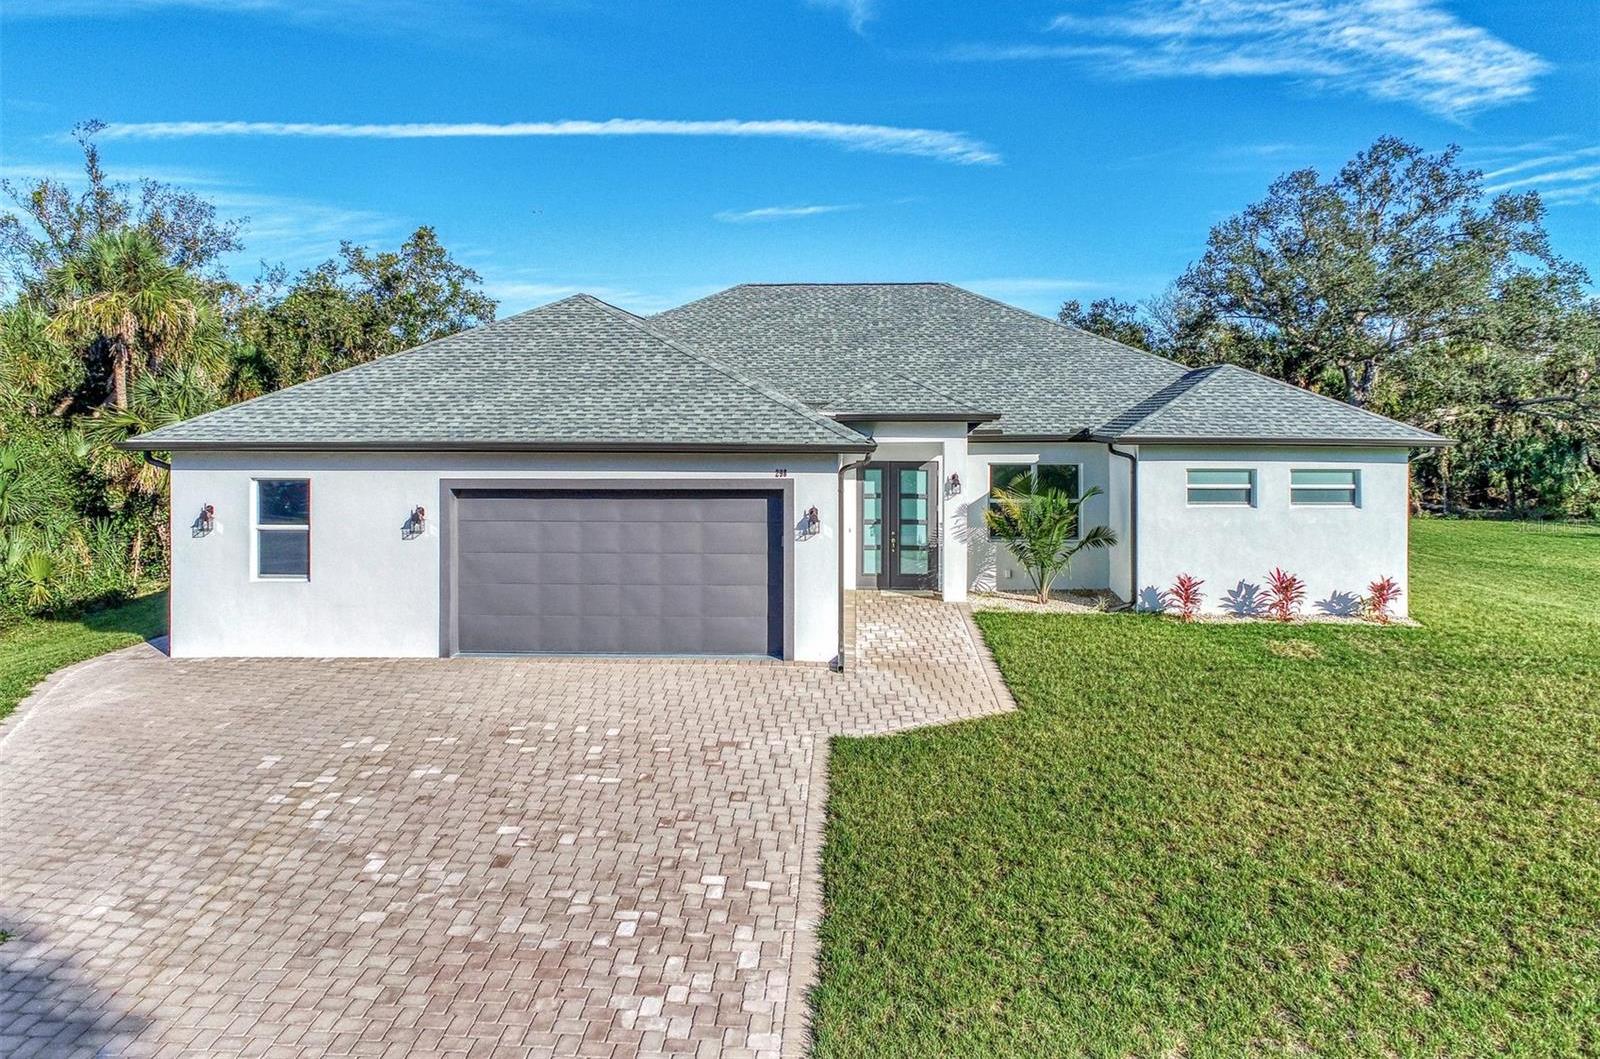 Photo one of 298 Lecturn St Port Charlotte FL 33954 | MLS D6133599